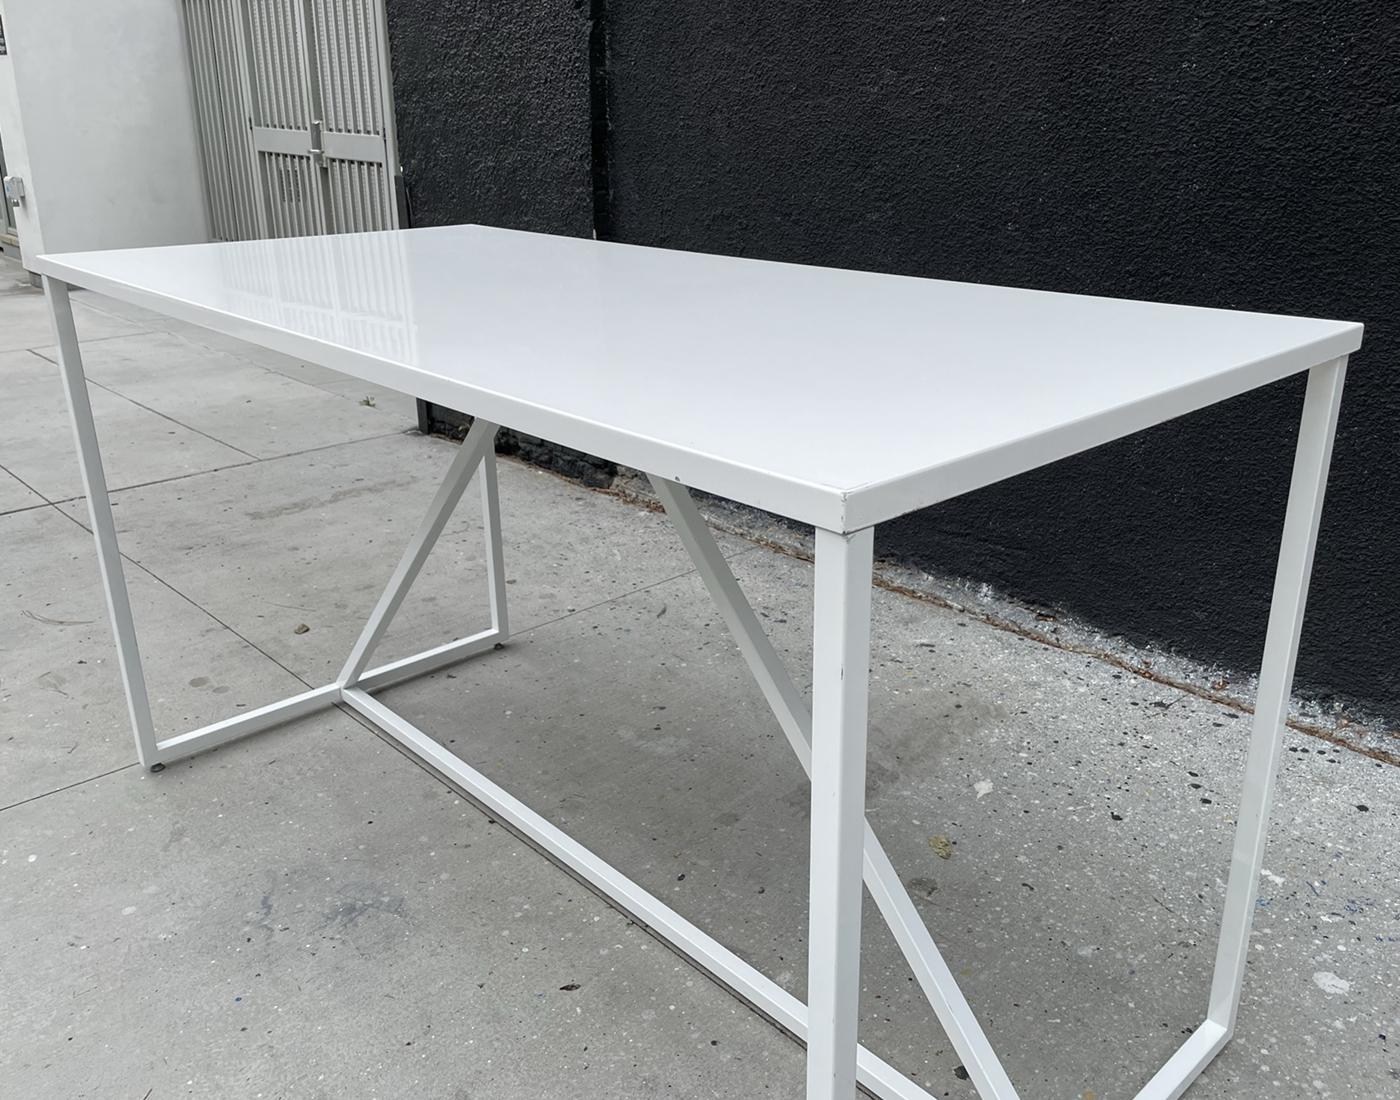 American Desk or Bar Height Table in Metal and Powder Coated